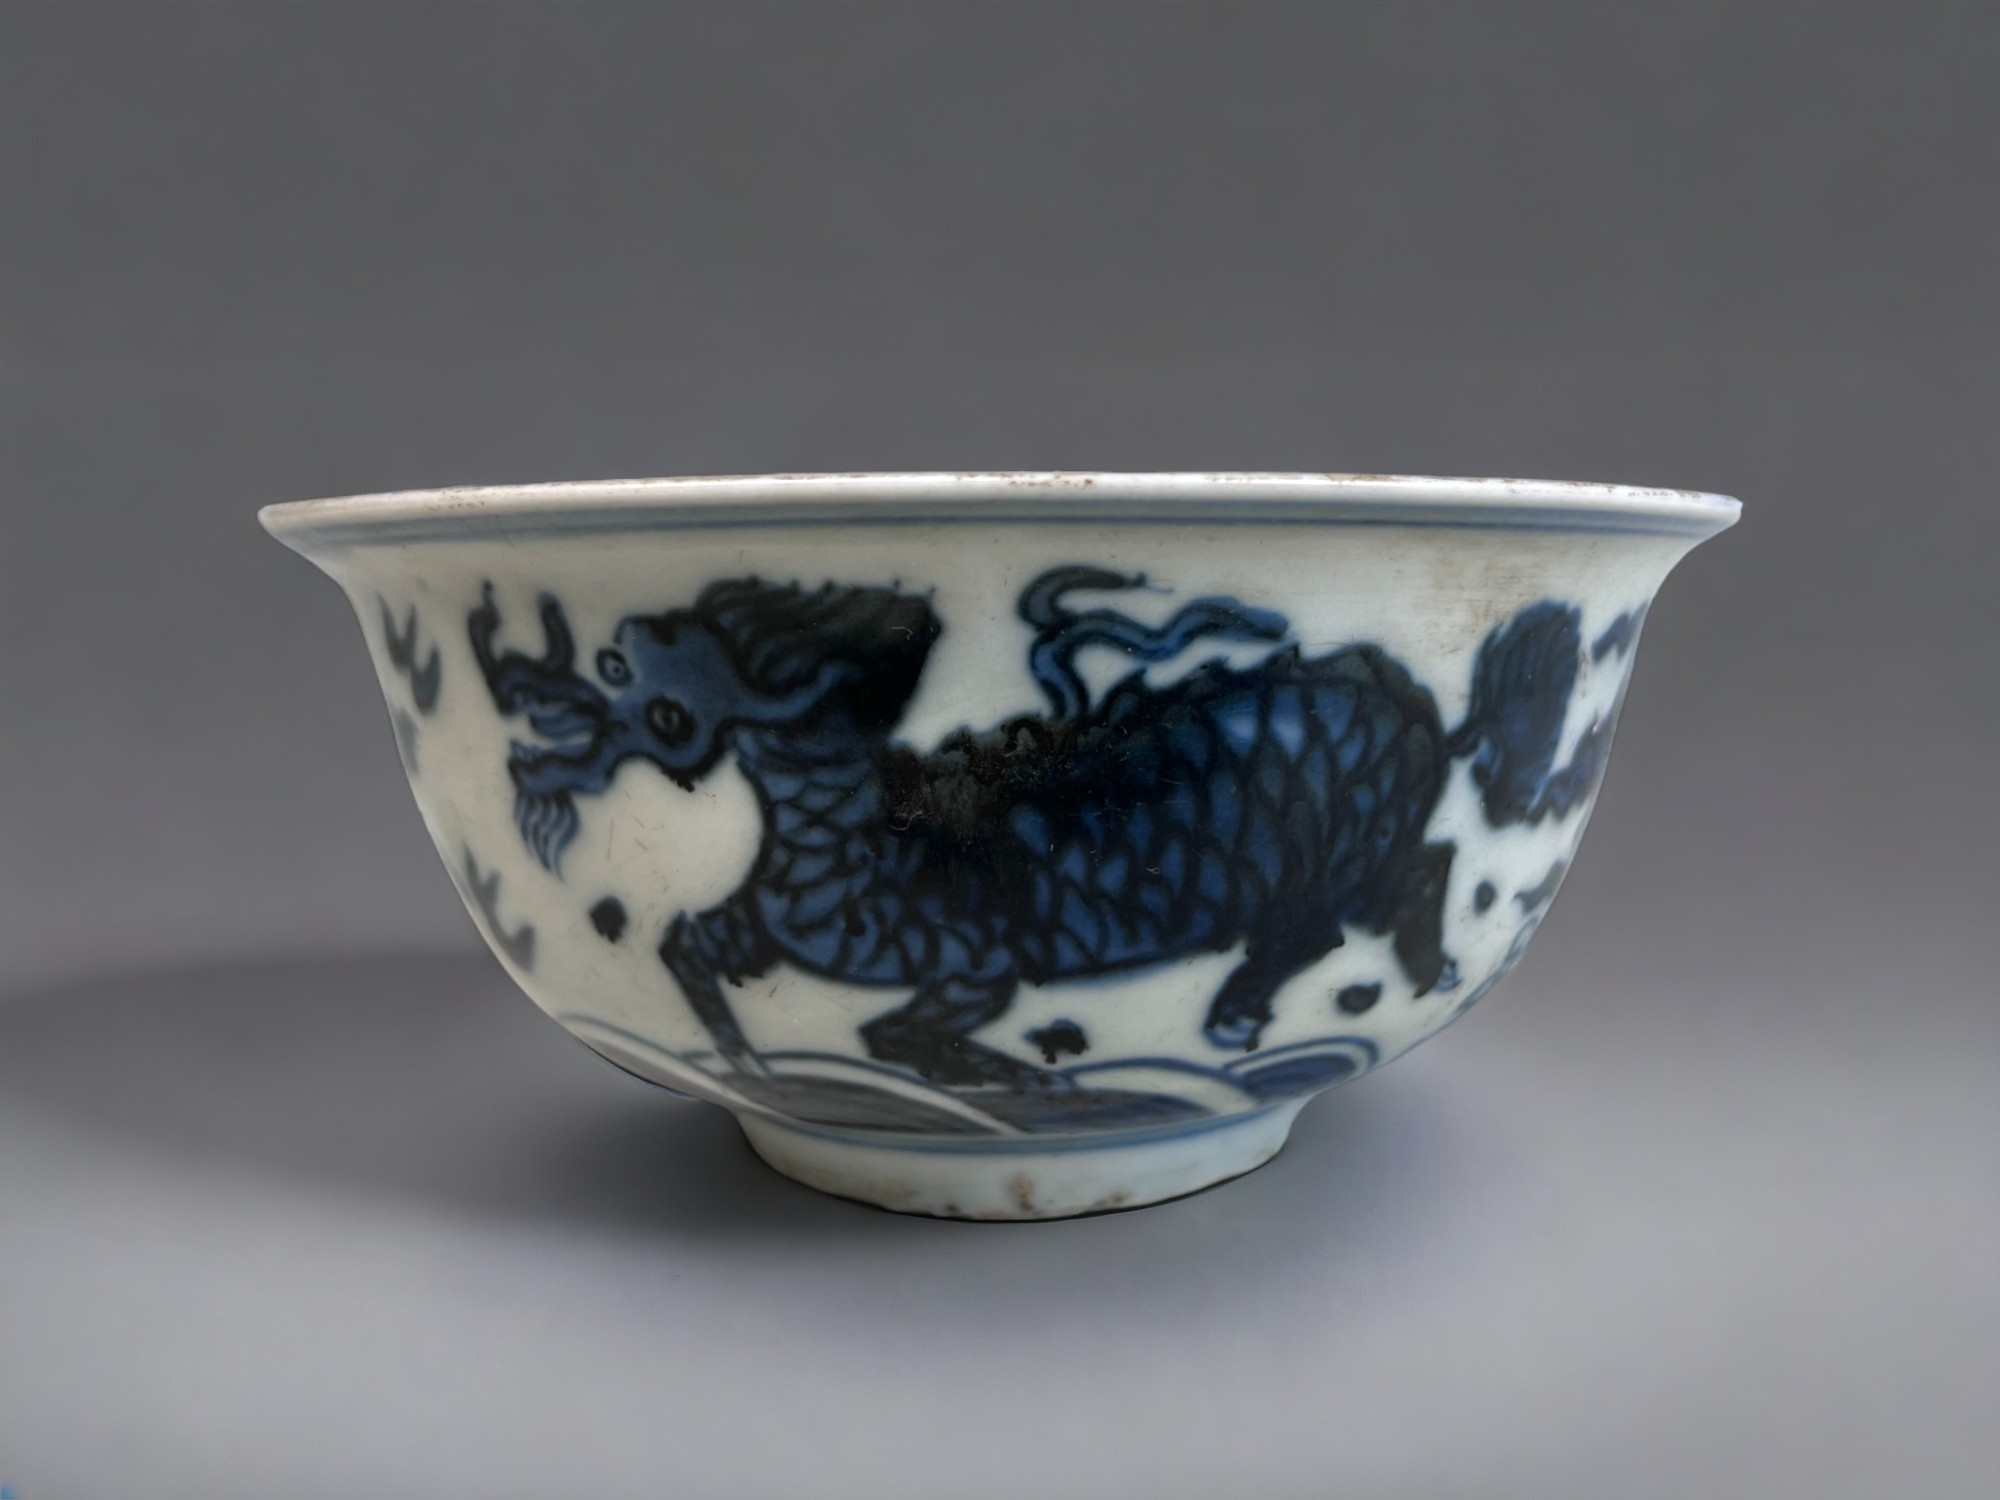 A CHINESE BLUE & WHITE PORCELAIN BOWL. Painted in the Kangxi style, depicting mythical Horse, - Image 3 of 5